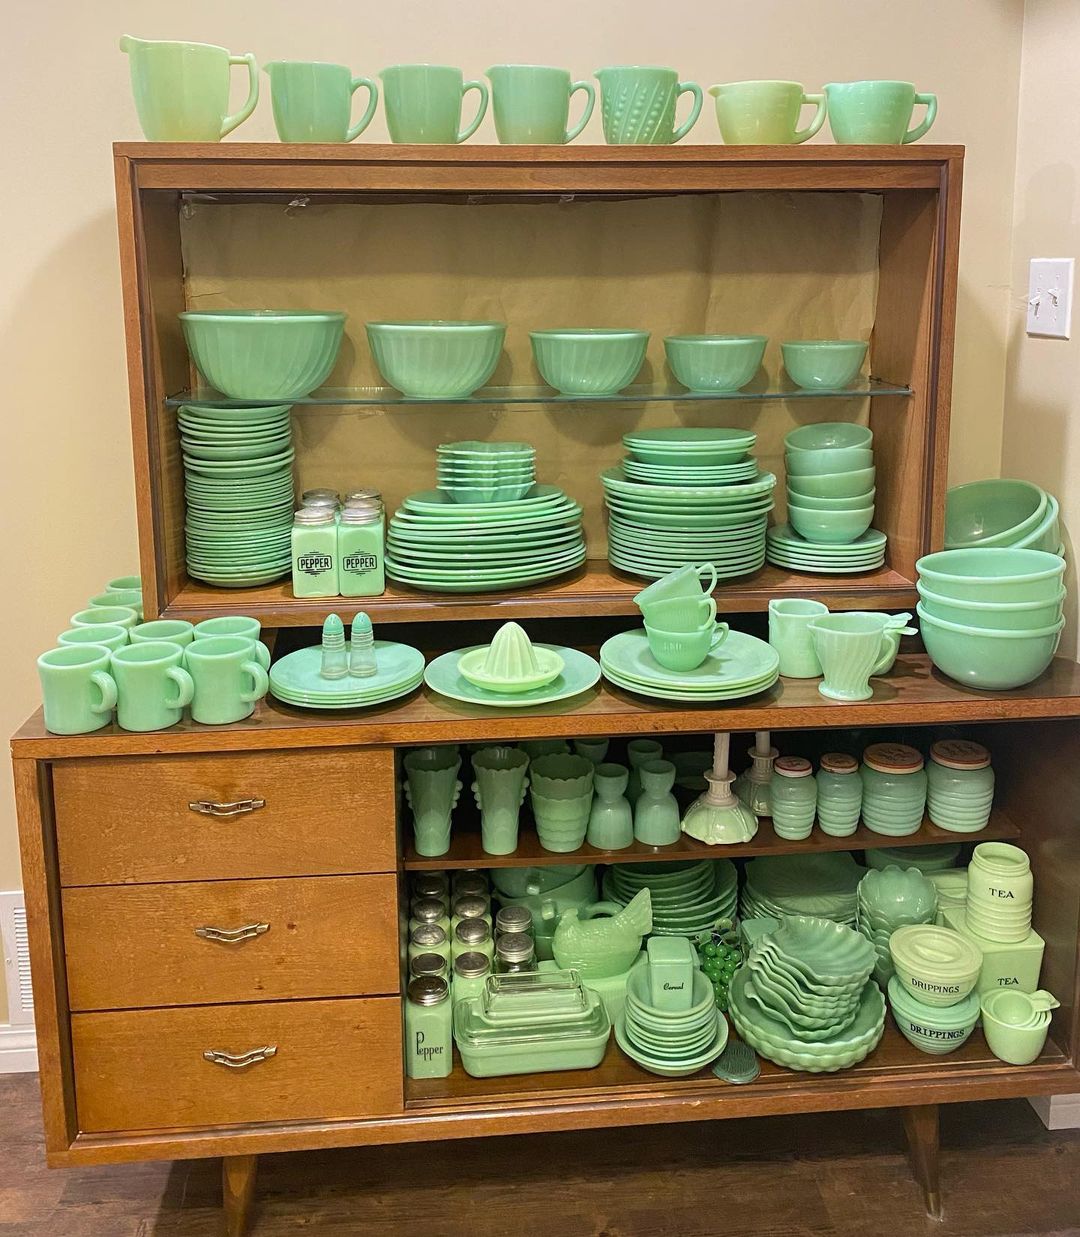 Fire-King Grill's Jadeite Collection